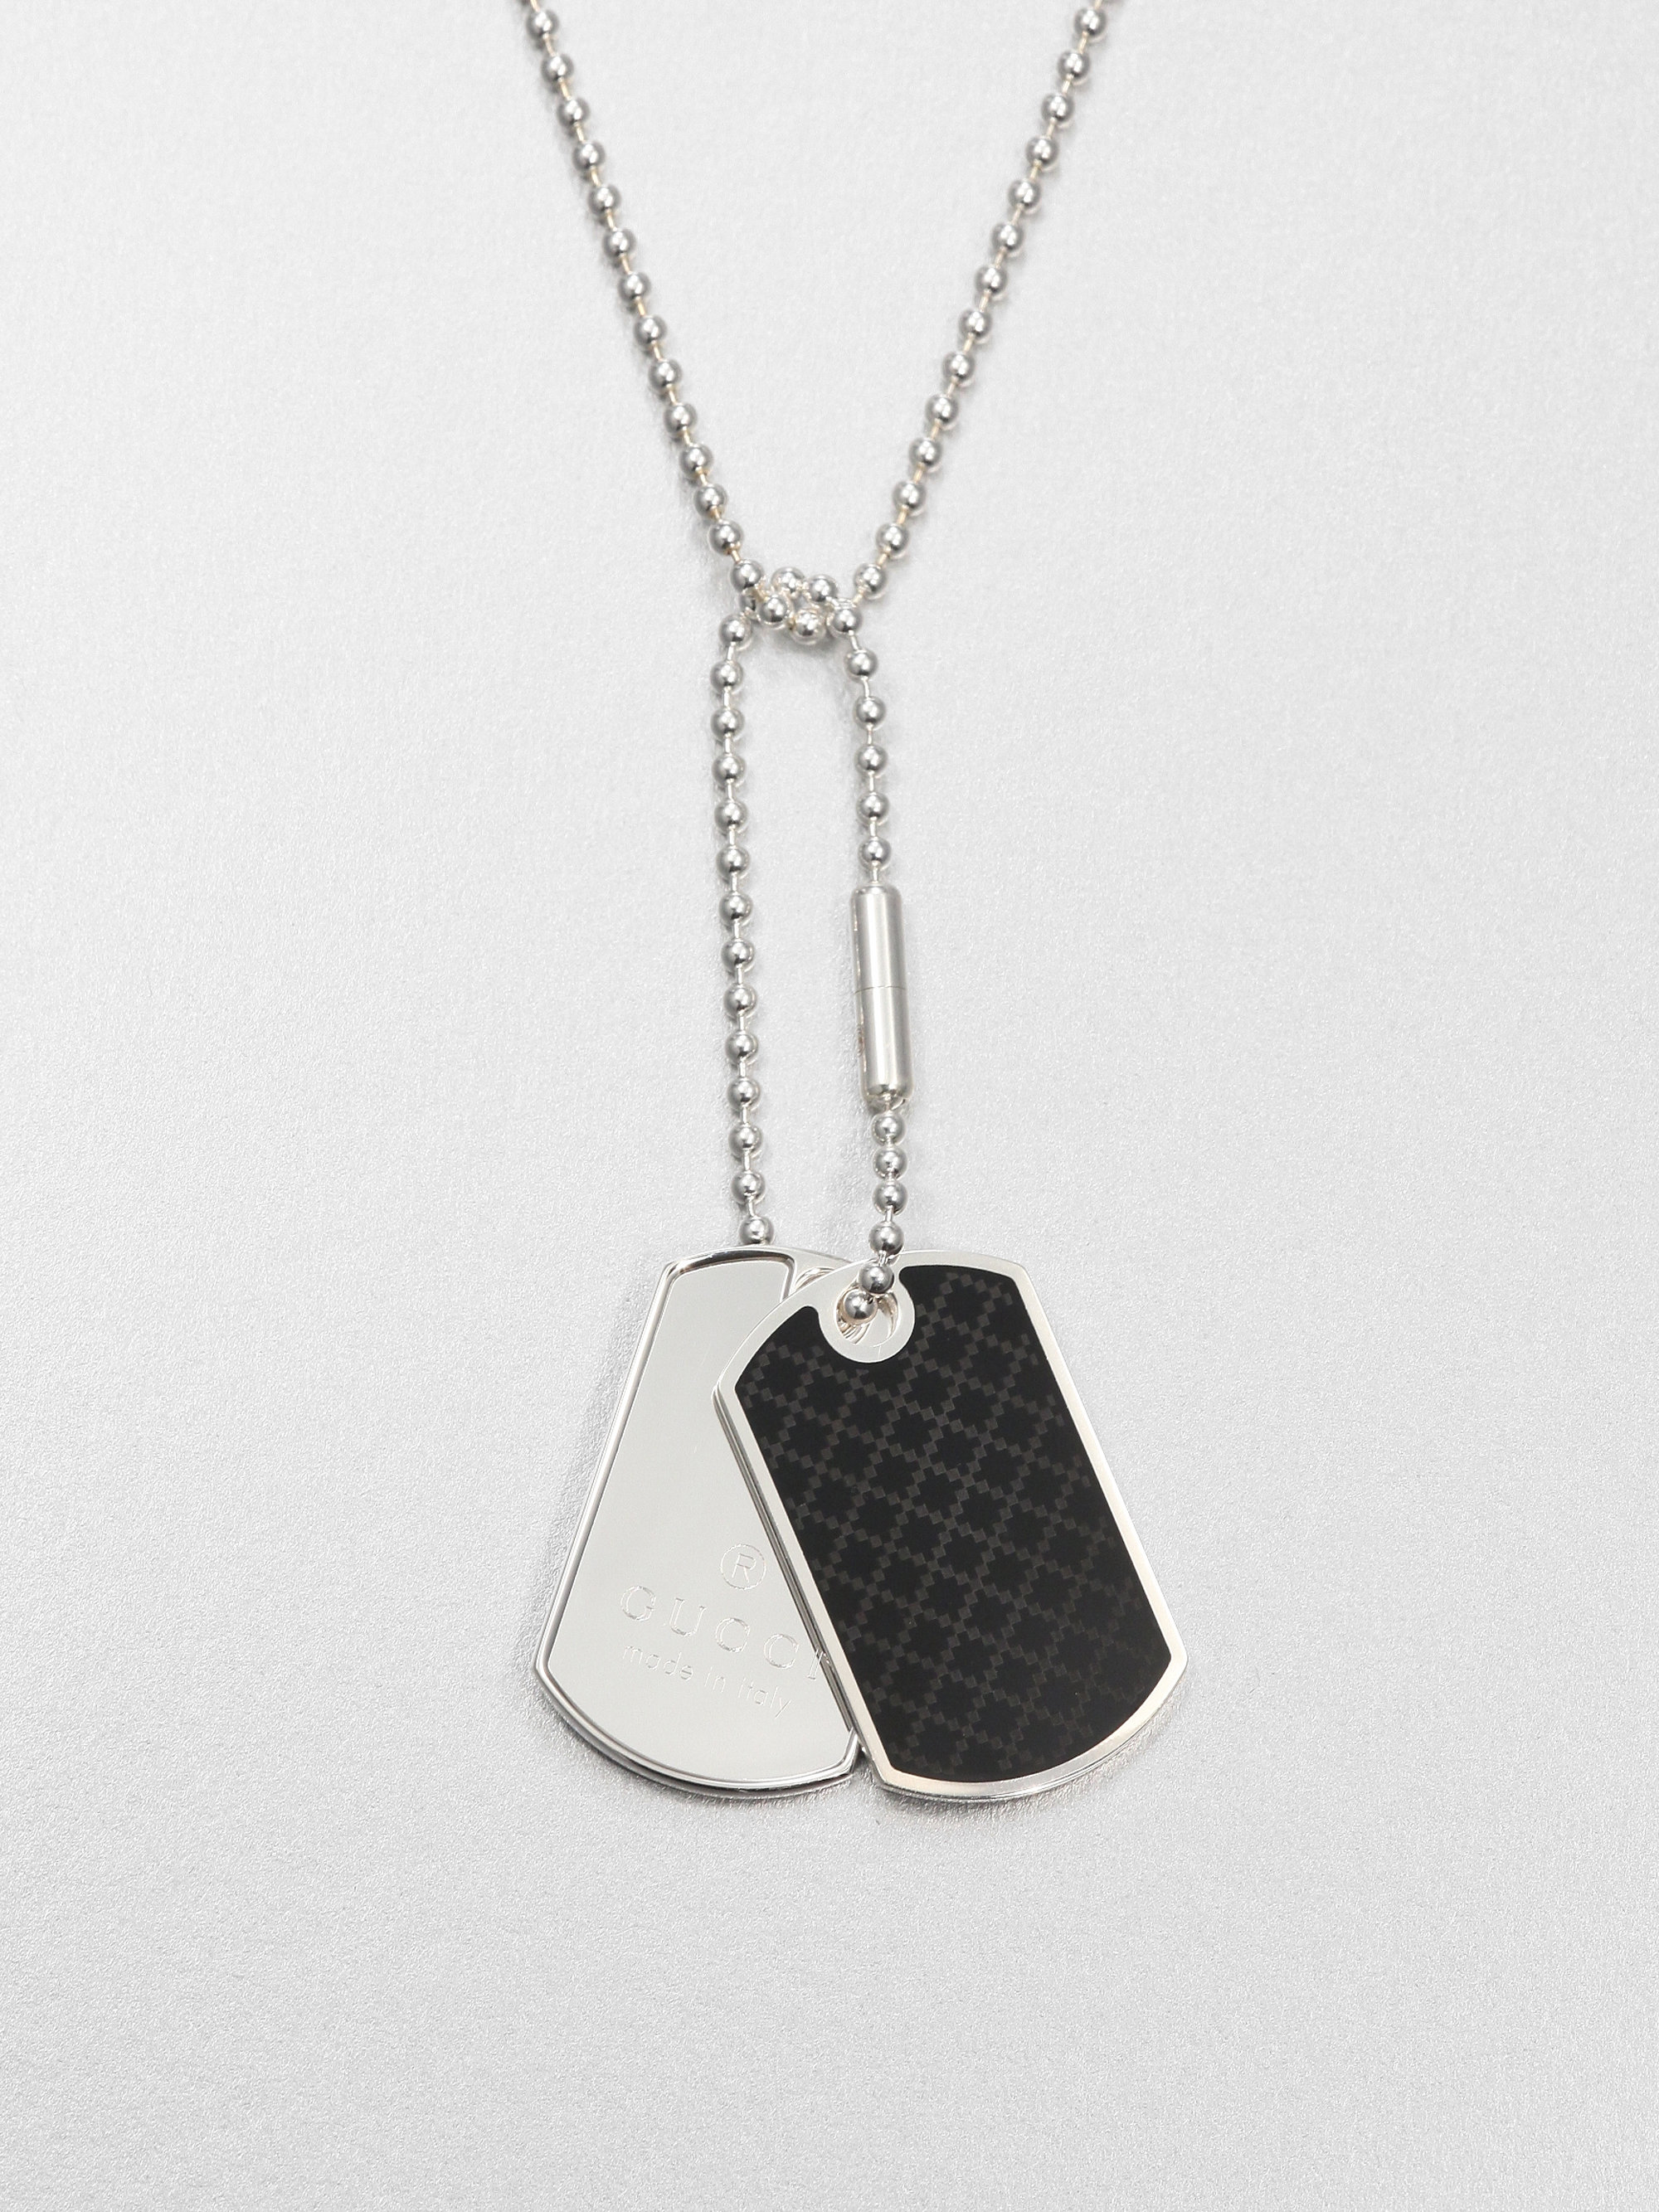 Lyst - Gucci Dog Tag Sterling Silver Necklace in Black for Men